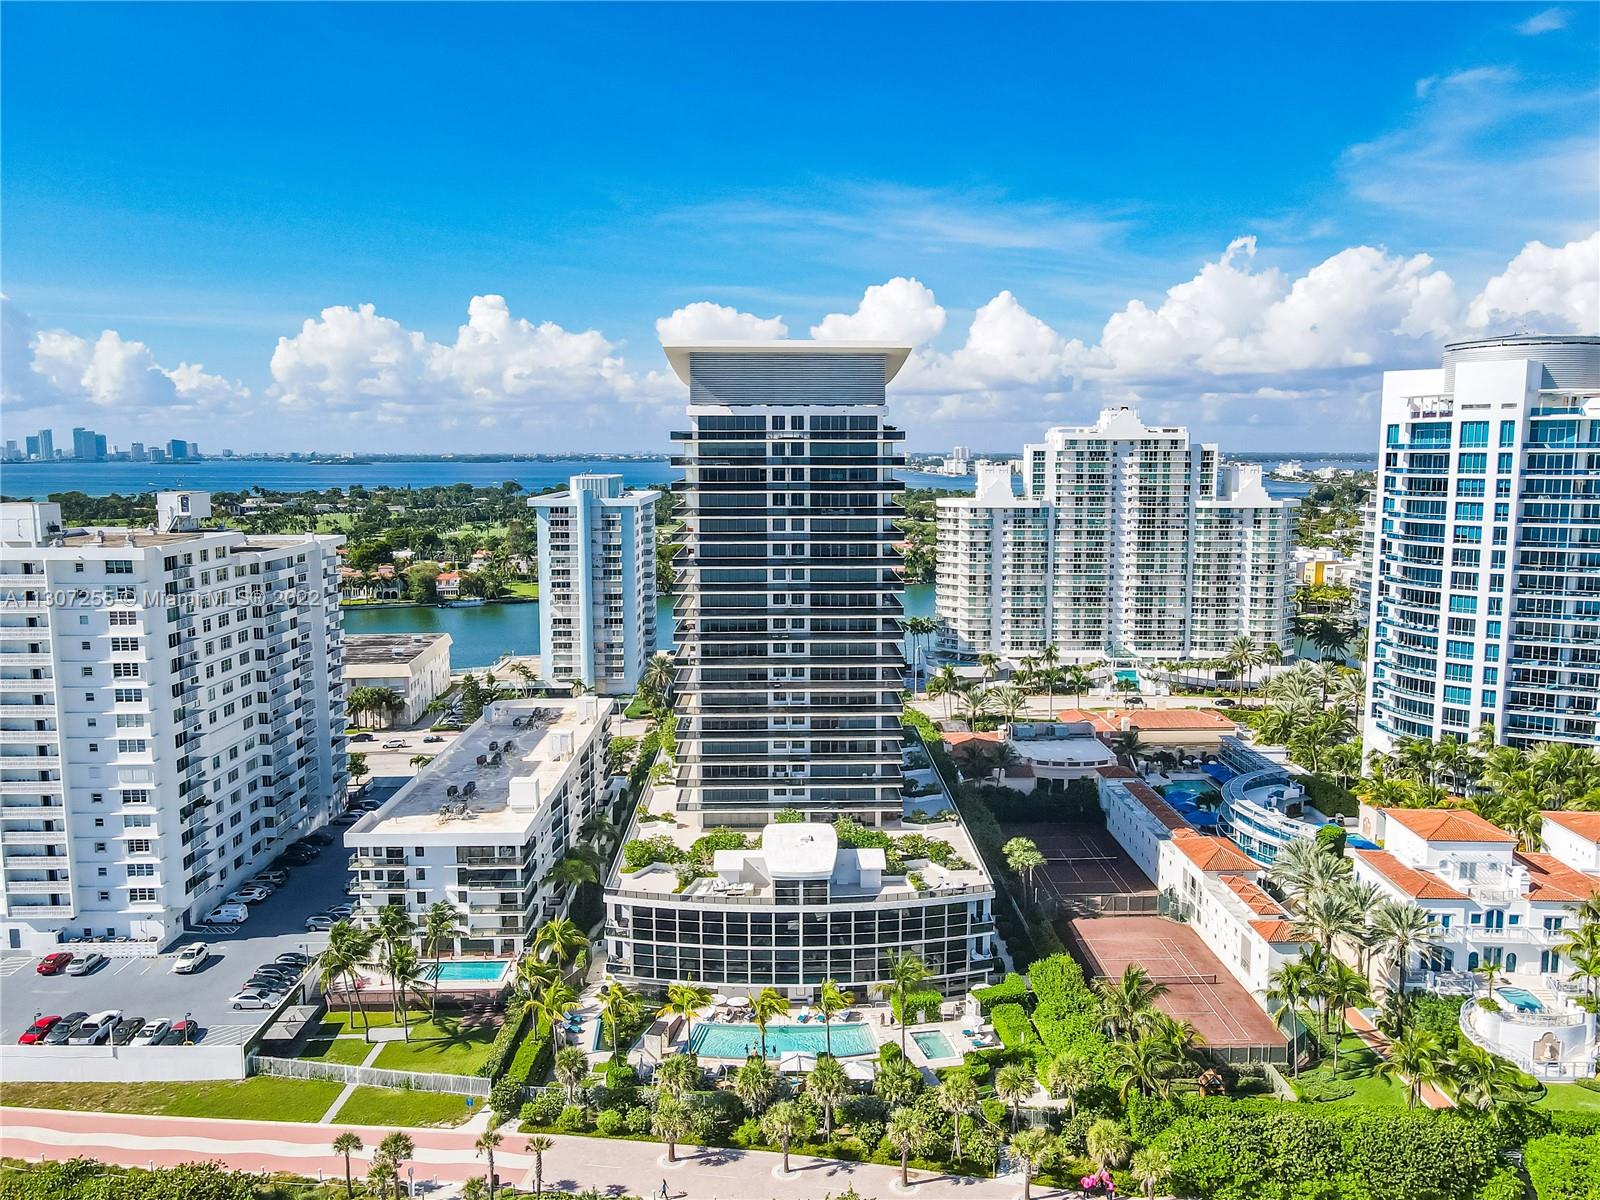 Beautiful one bedroom unit in Mei. Floor-to-ceiling windows with southern exposure offering ocean views, and western view of Downtown Miami for spectacular sunsets. Located on Millionaire’s Row in Miami Beach, this Zen-influenced oceanfront luxury project offers landscaped infinity pool and gardens, beach and pool service, Zen library, yoga room, lounge, state-of-the-art fitness center, 24-hour attended lobby, and valet parking for all residents.